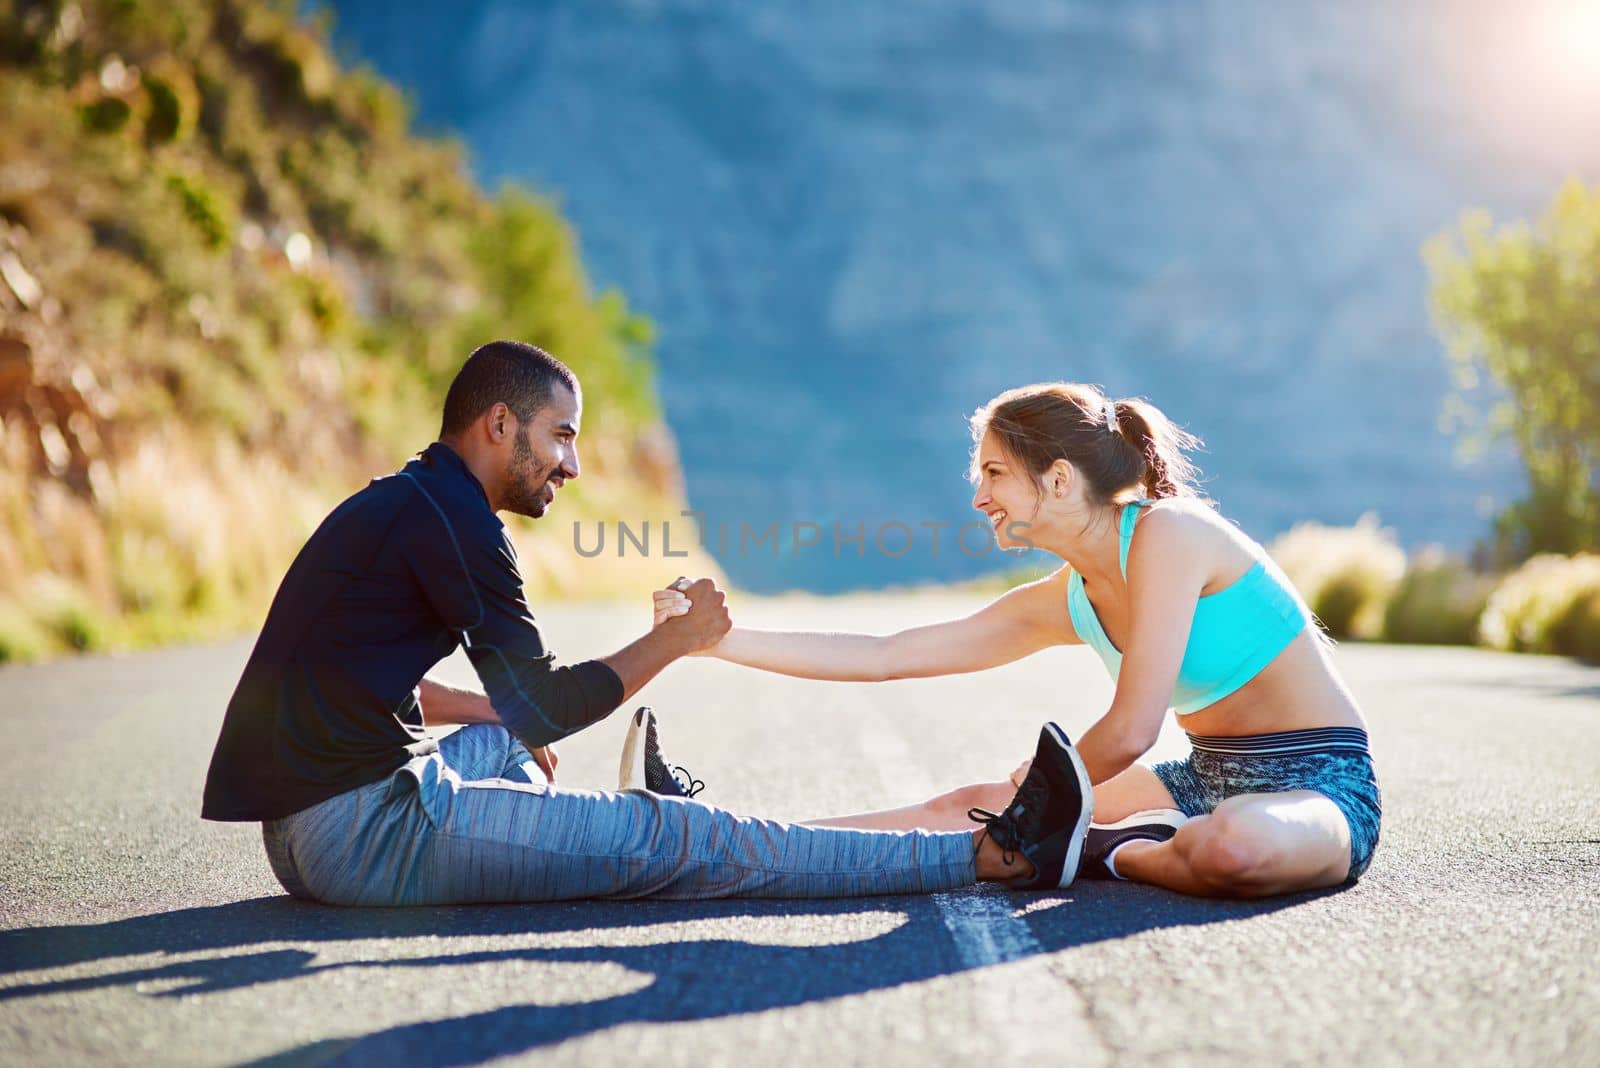 Stretching it out with some help. a sporty young couple stretching before a run outside. by YuriArcurs